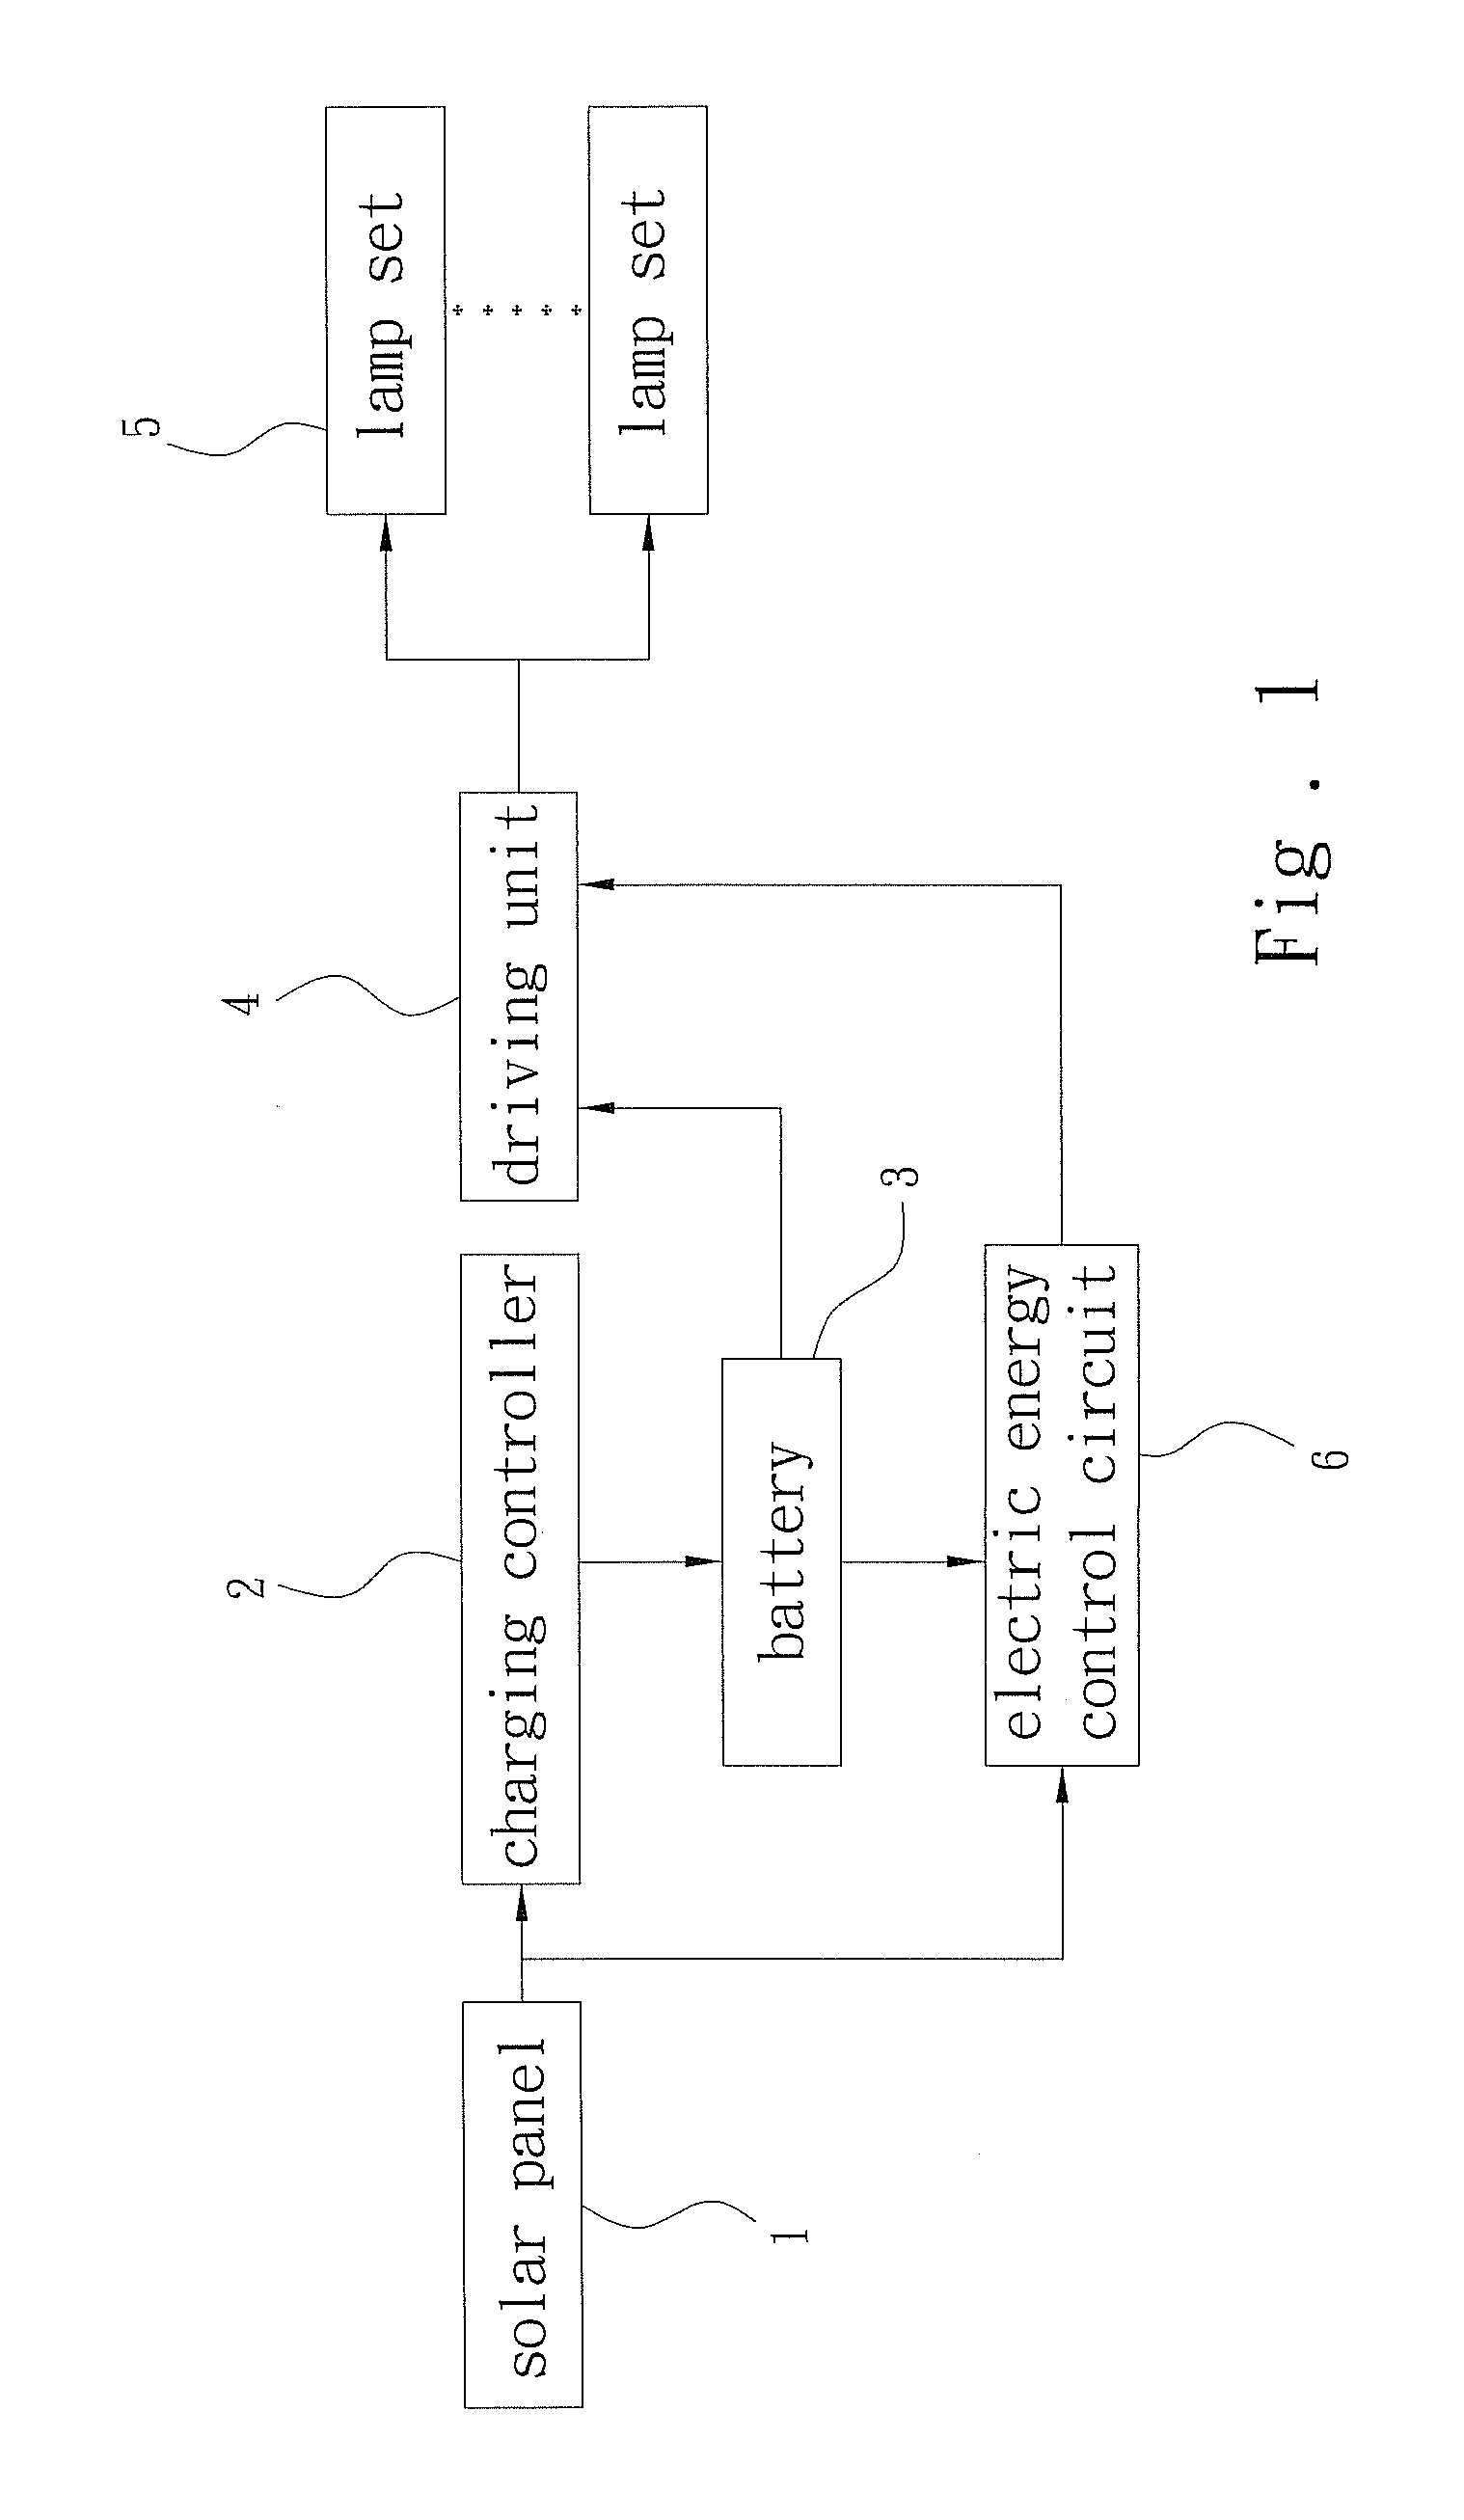 Electric energy control circuit for solar power illumination system